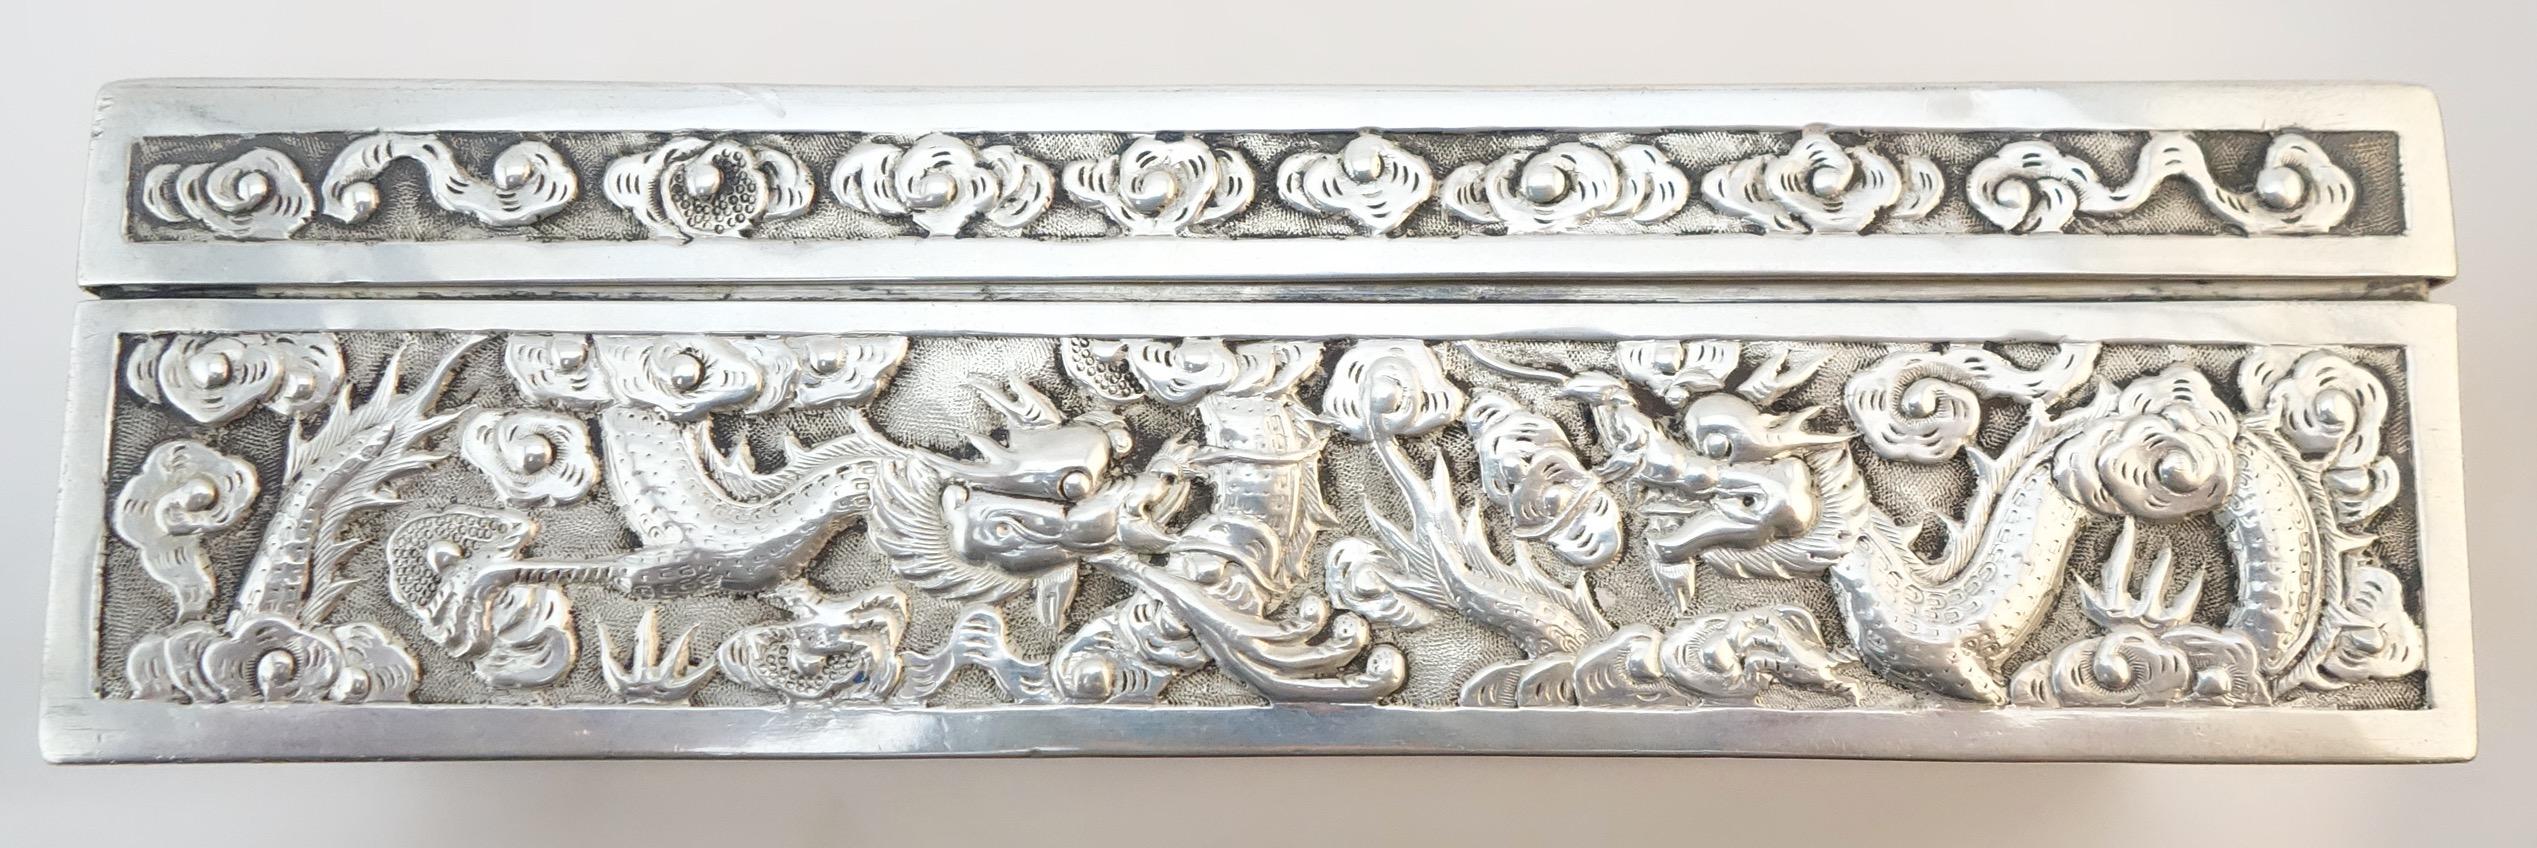 Qing Chinese Export Silver Openwork and Repousse Box by Hung Chong, circa 1880